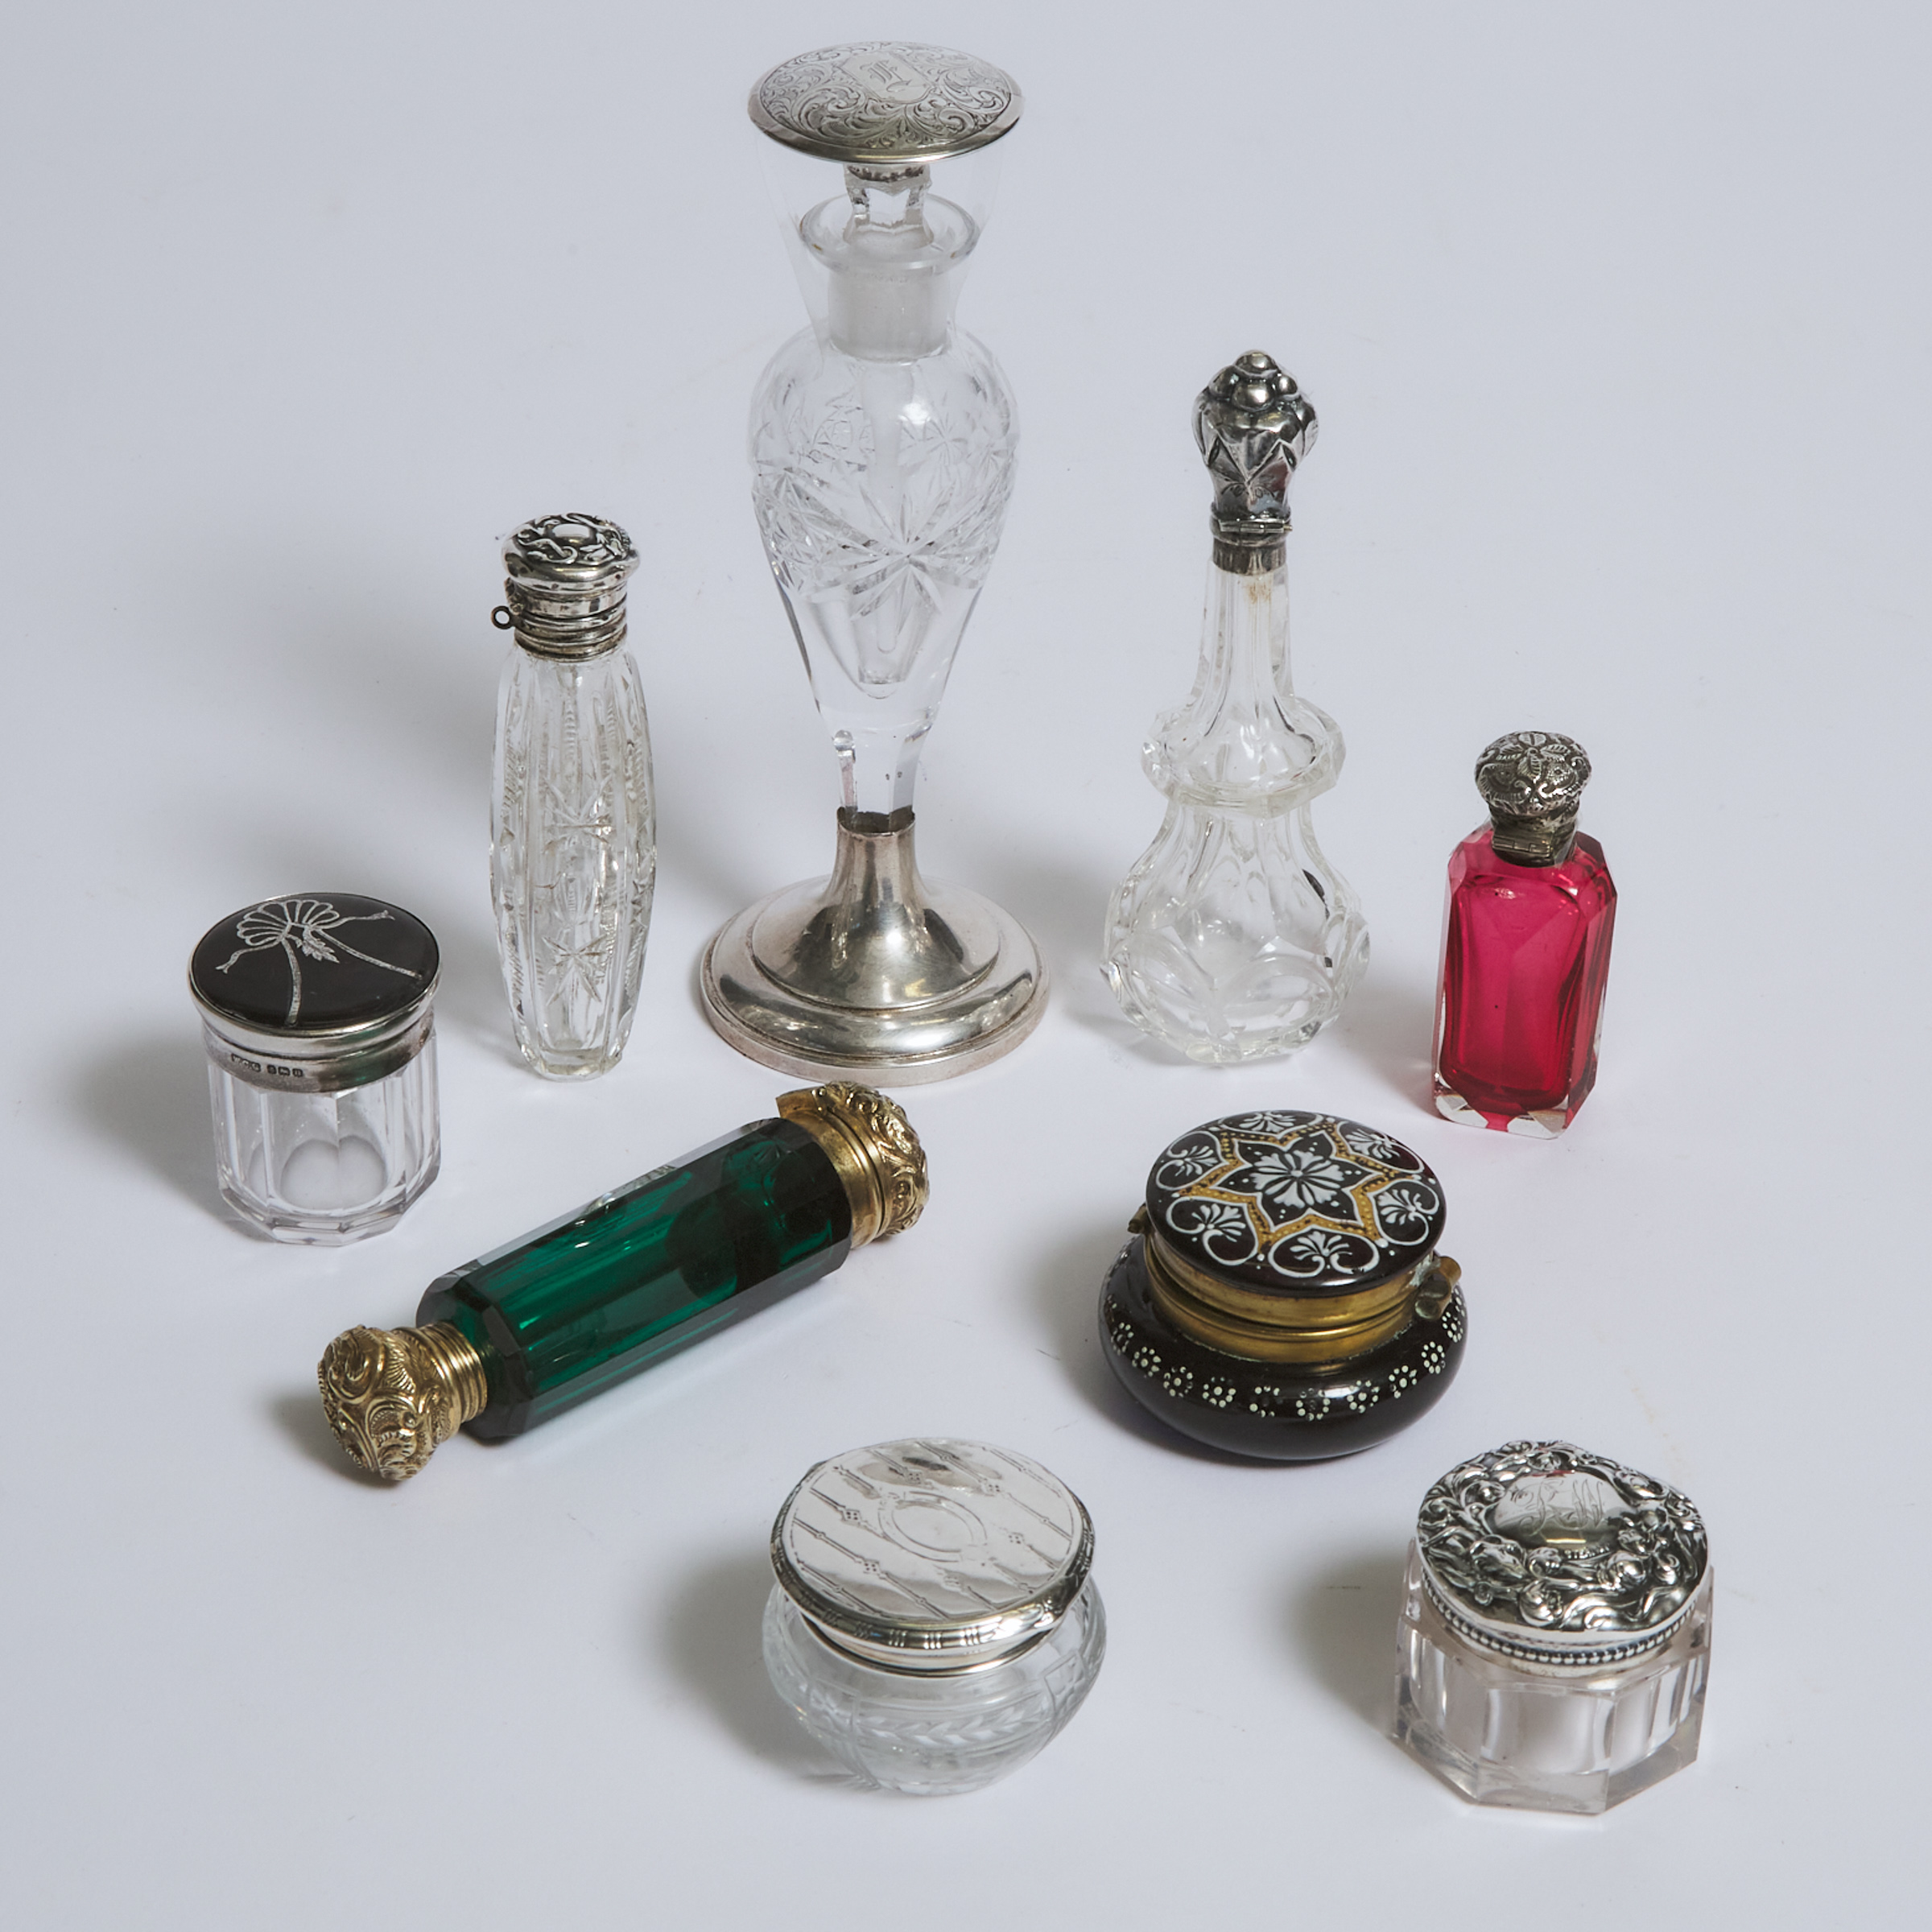 Group of Five Silver and Metal Mounted Glass Perfume Bottles and Four Small Jars, late 19th/early 20th century